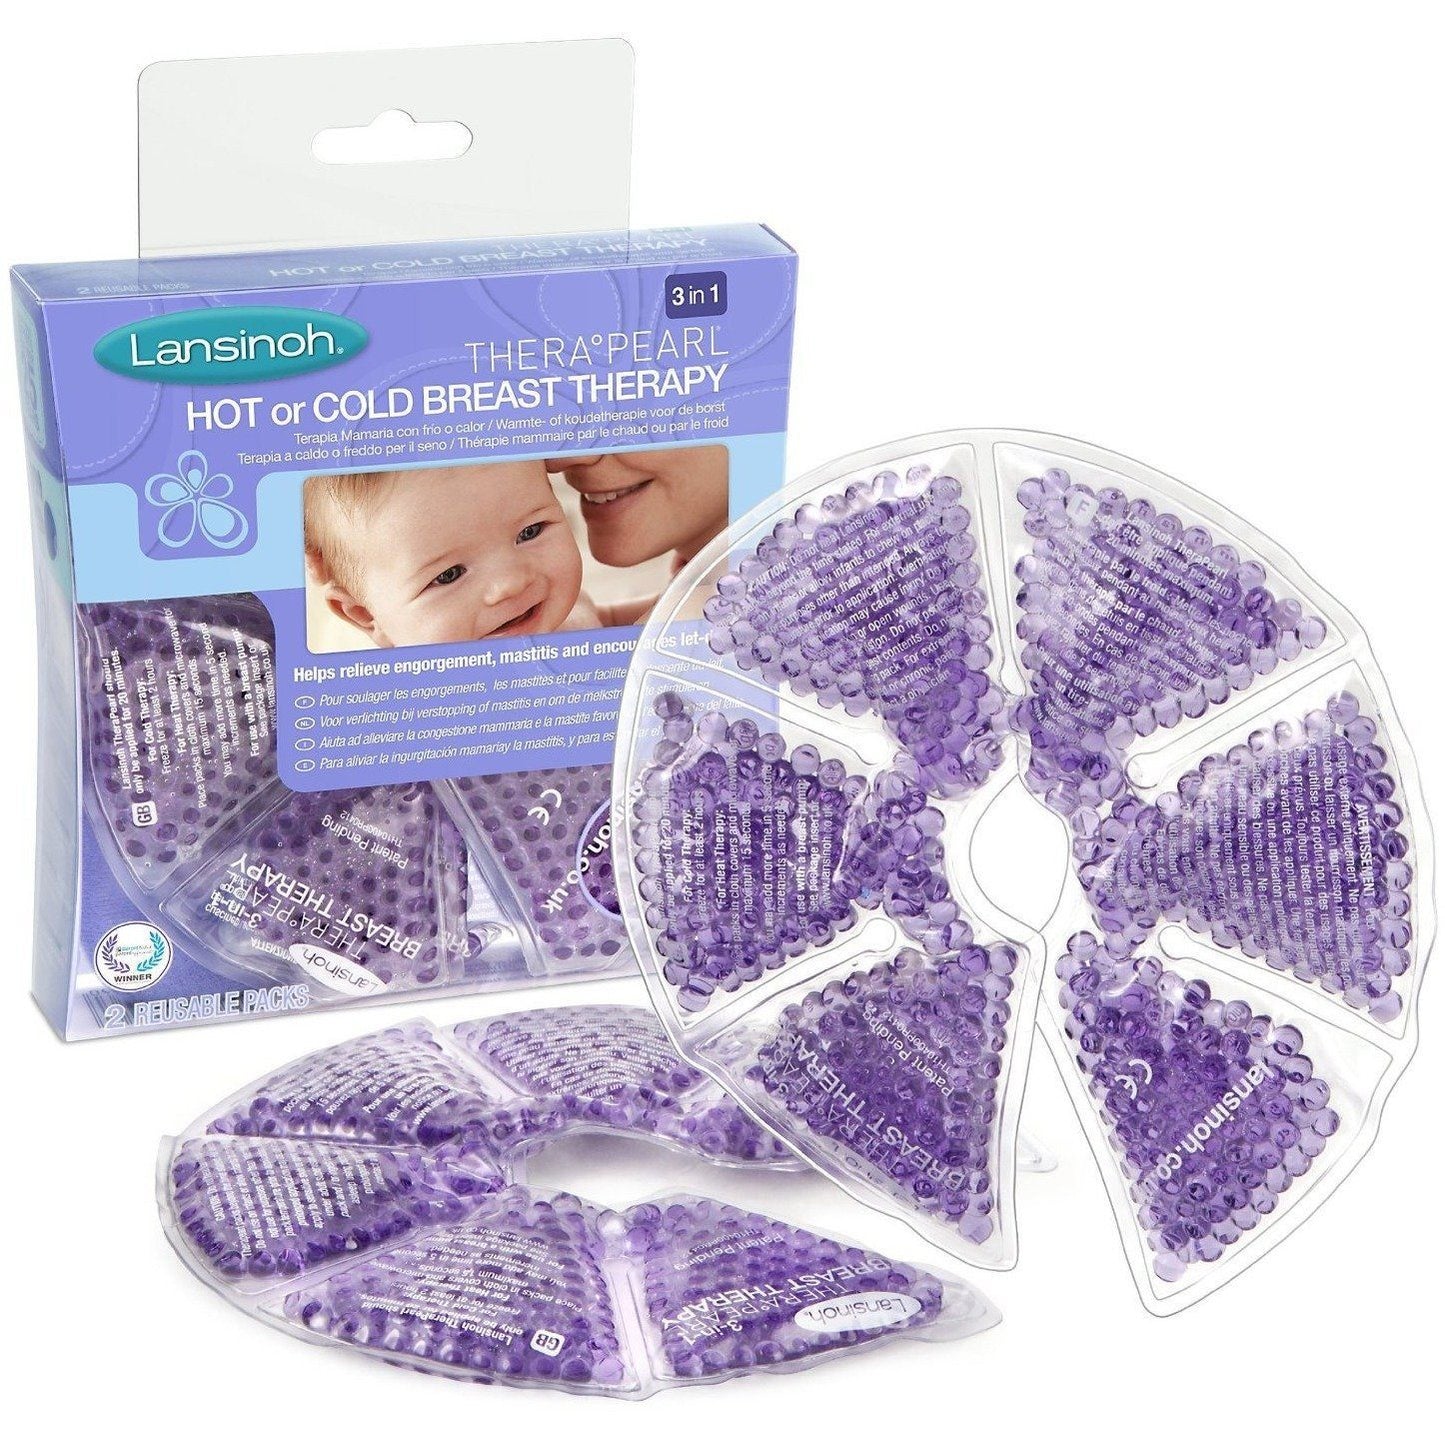 Lansinoh TheraPearl - 3 em 1 - Quente ou Frio Terapia para Mama Anne Claire Baby Store 